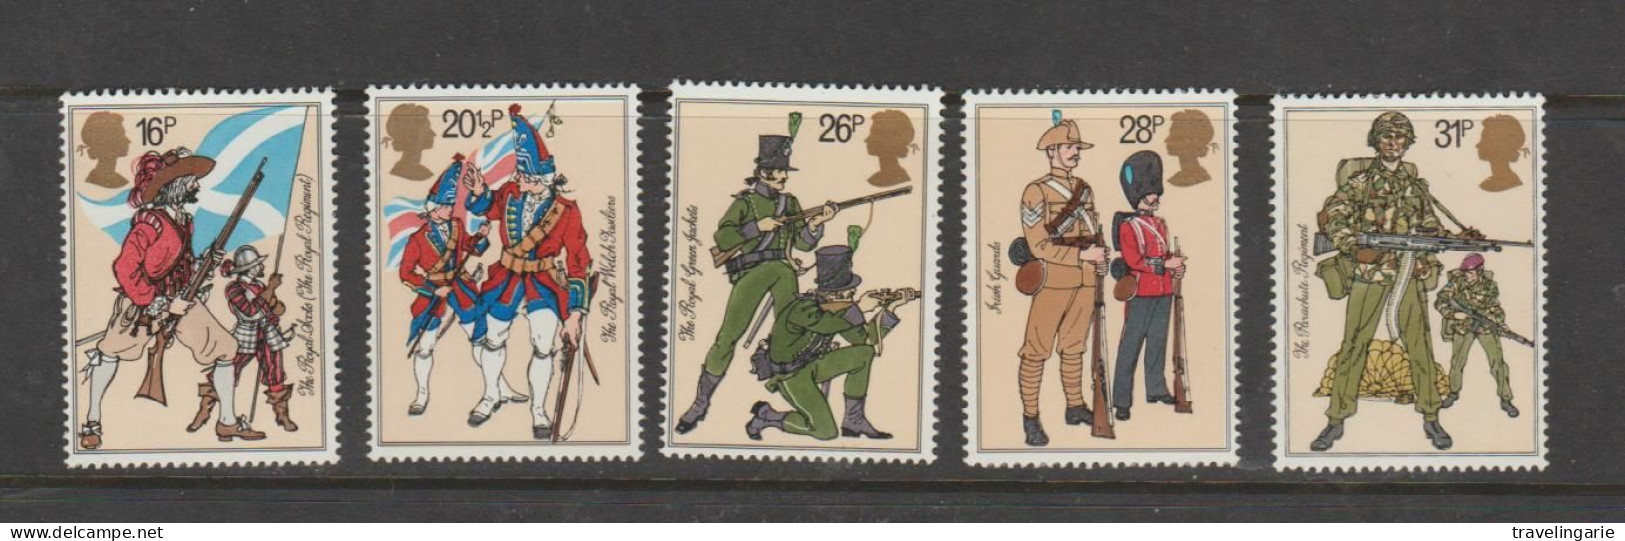 Great Britain 1983 British Army Uniforms MNH ** - Unused Stamps